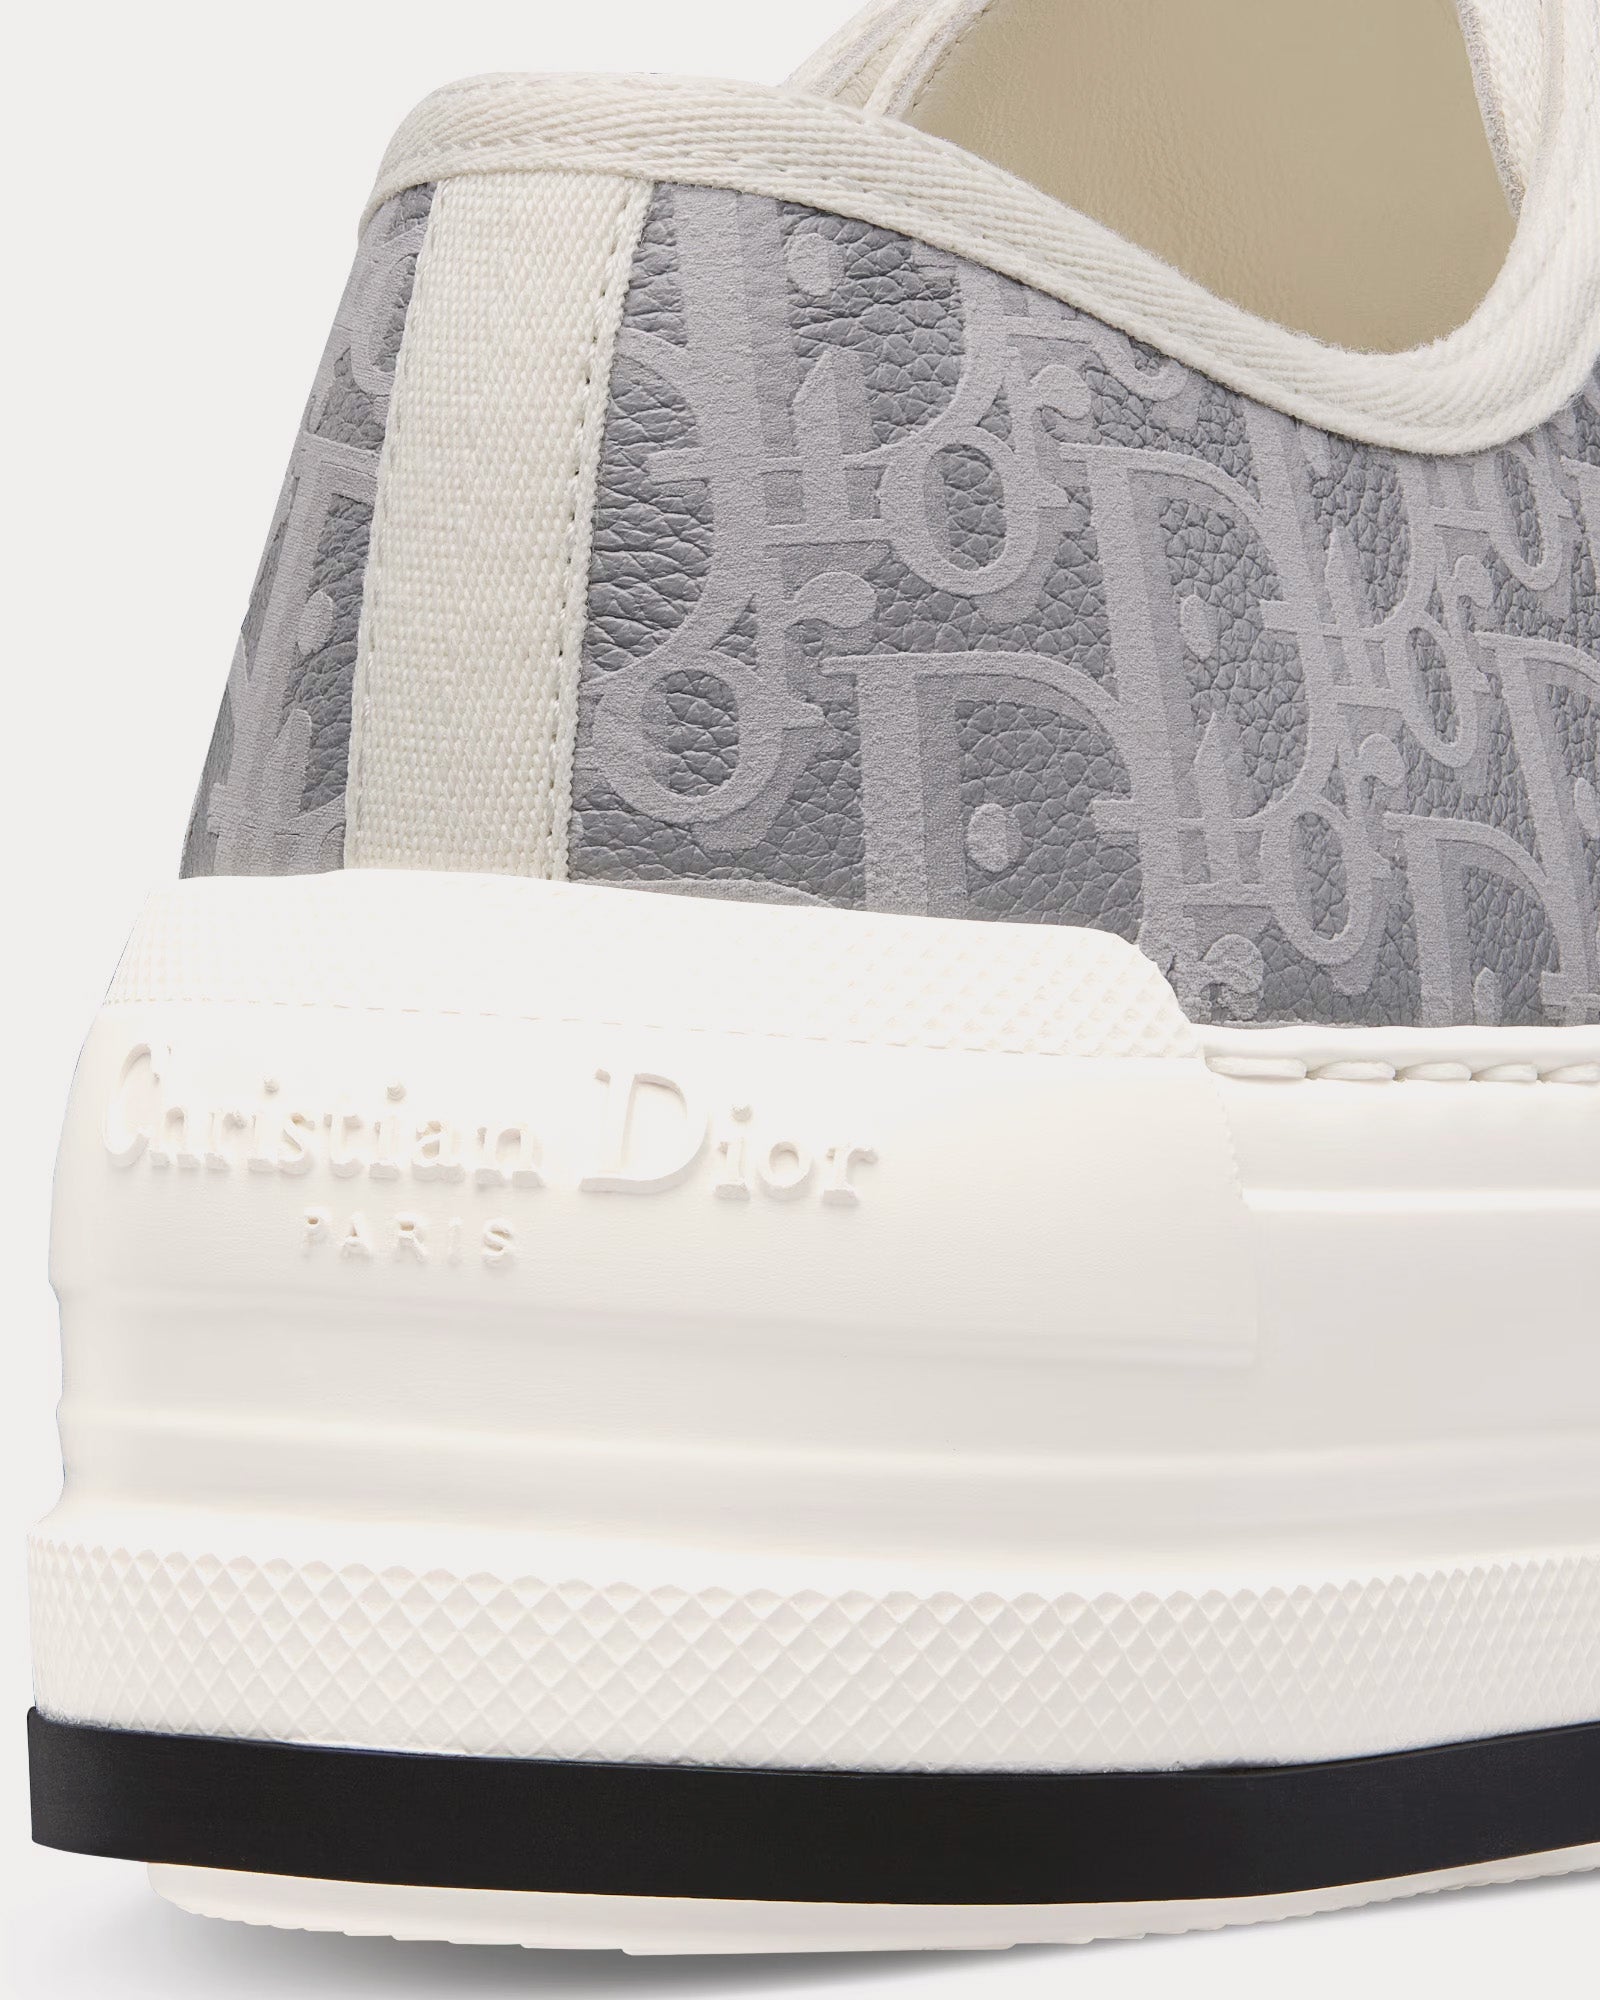 Dior - Walk'n'Dior Platform Gray Calfskin Textured with Dior Oblique Motif and Embroidered Cotton Low Top Sneakers